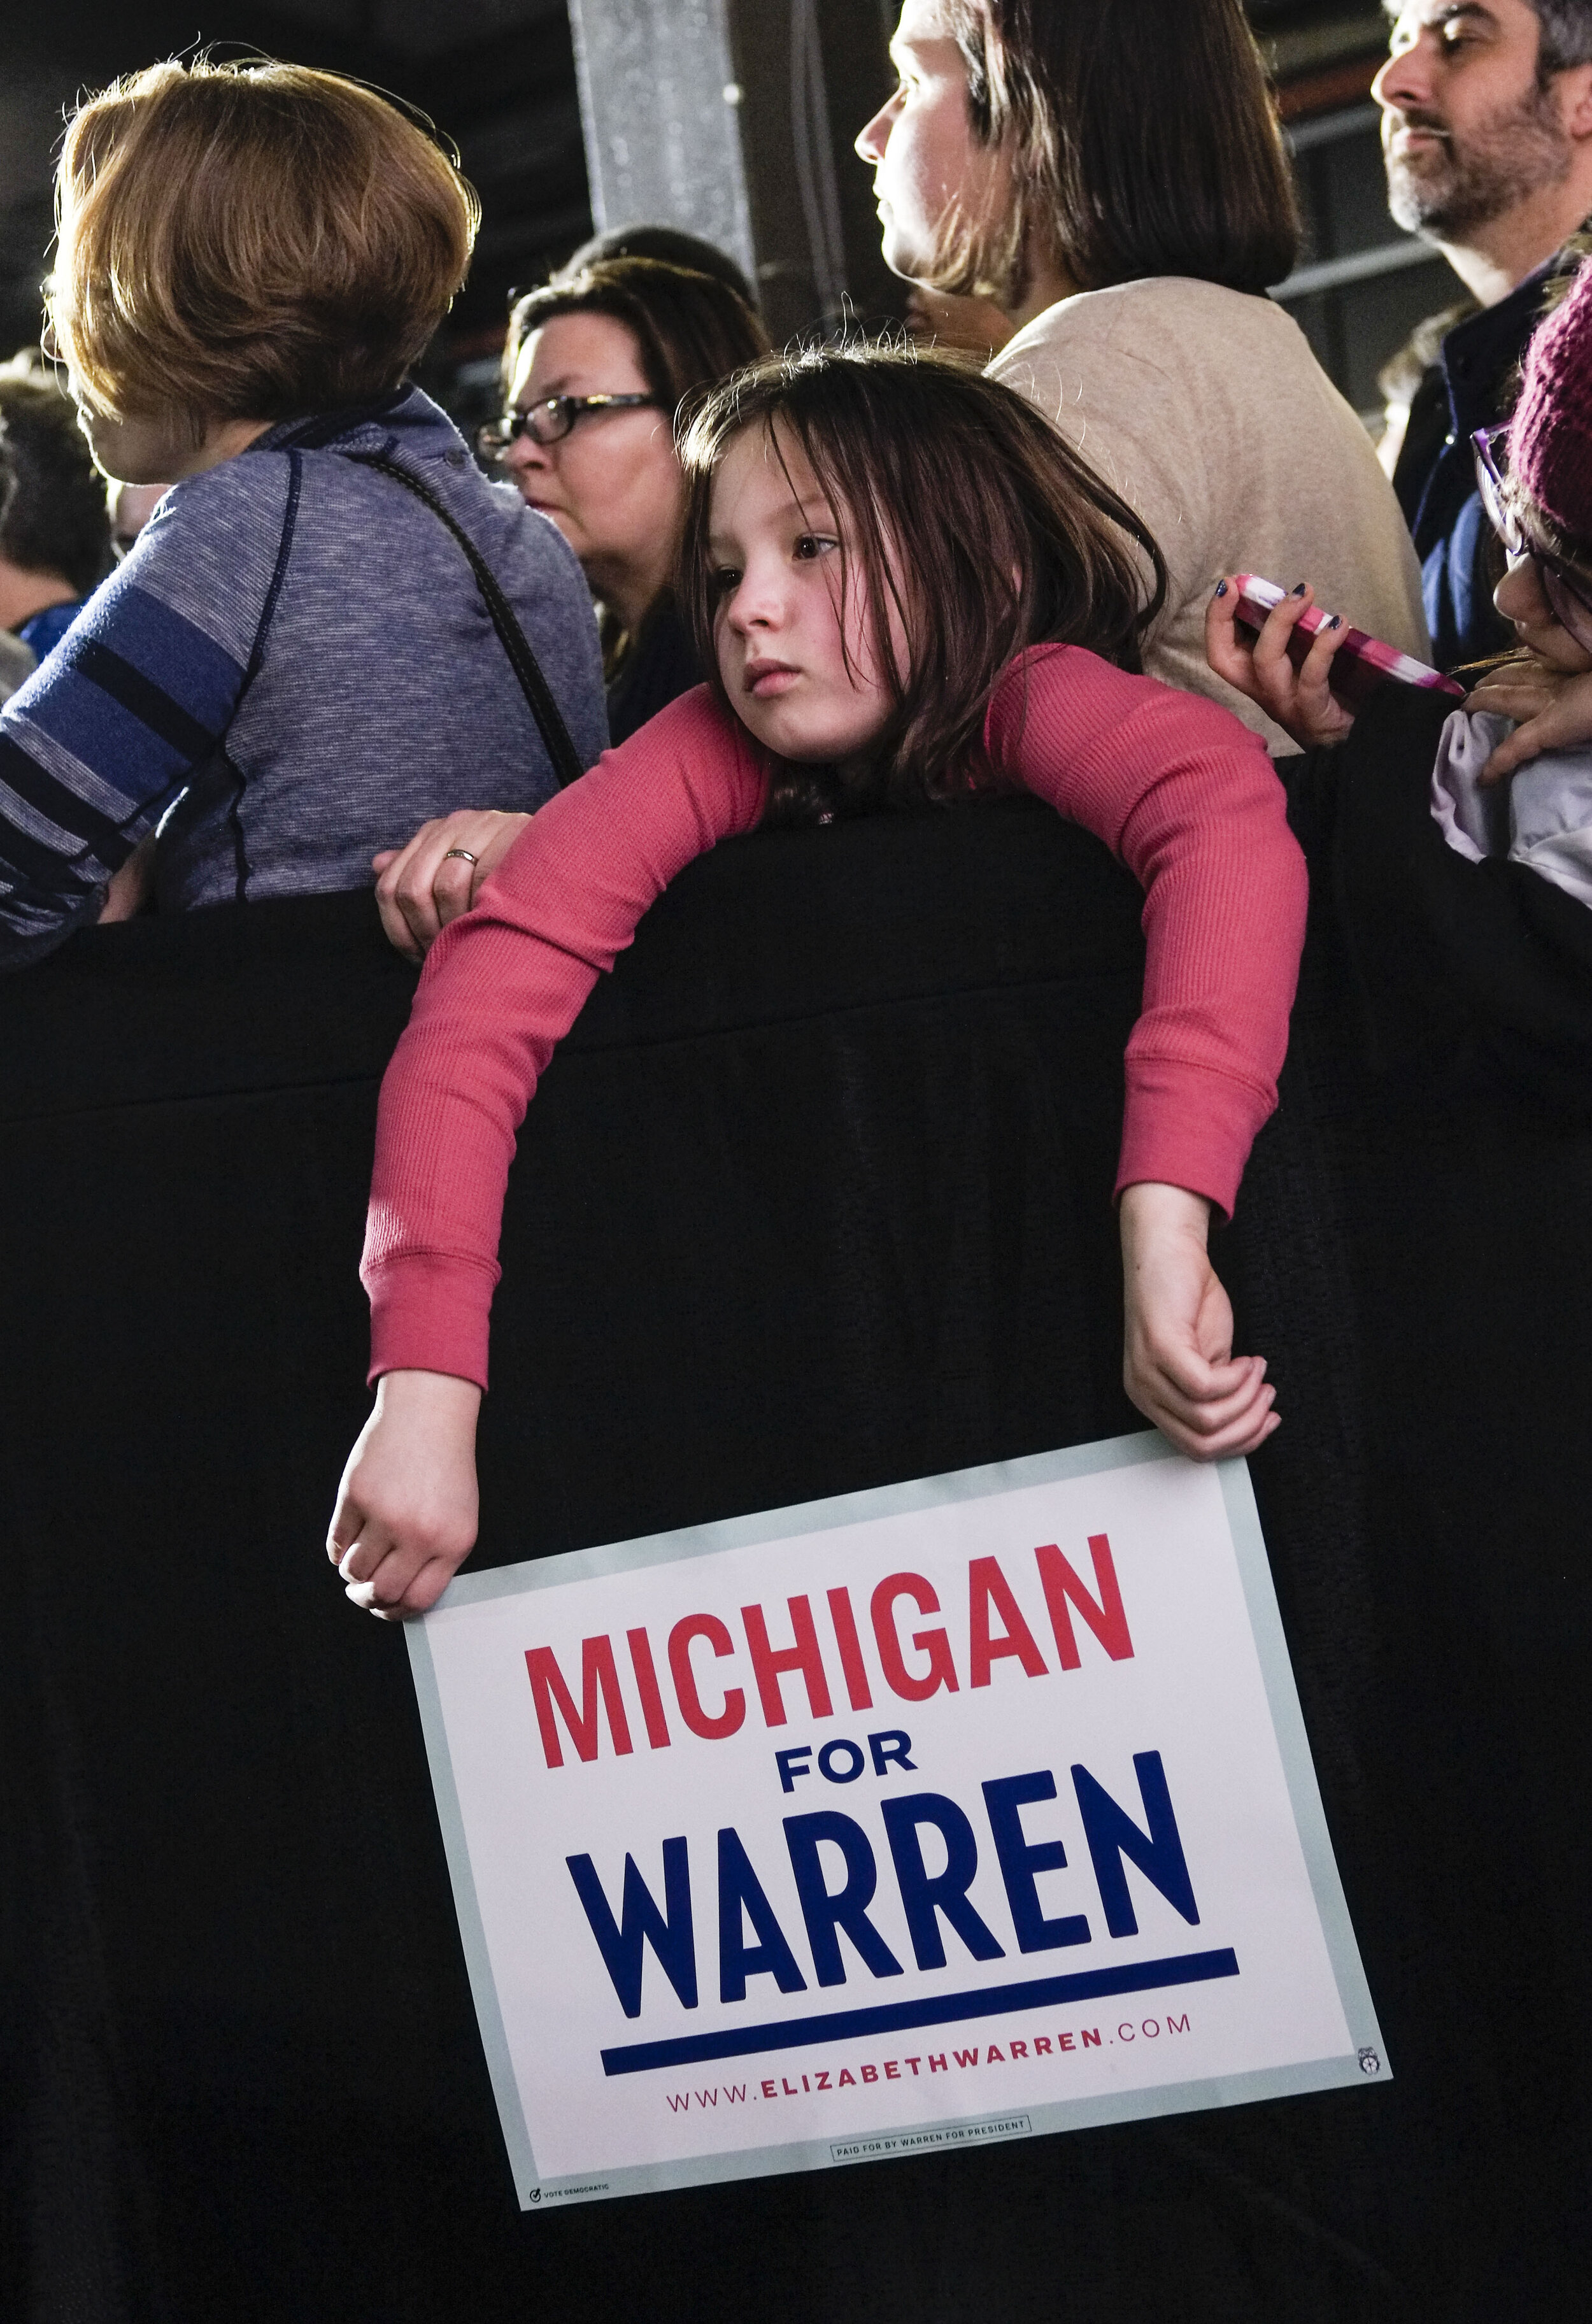  A young girl waits for Democratic candidate Elizabeth Warren during a campaign rally in Detroit, Michigan on March 3, 2020. 